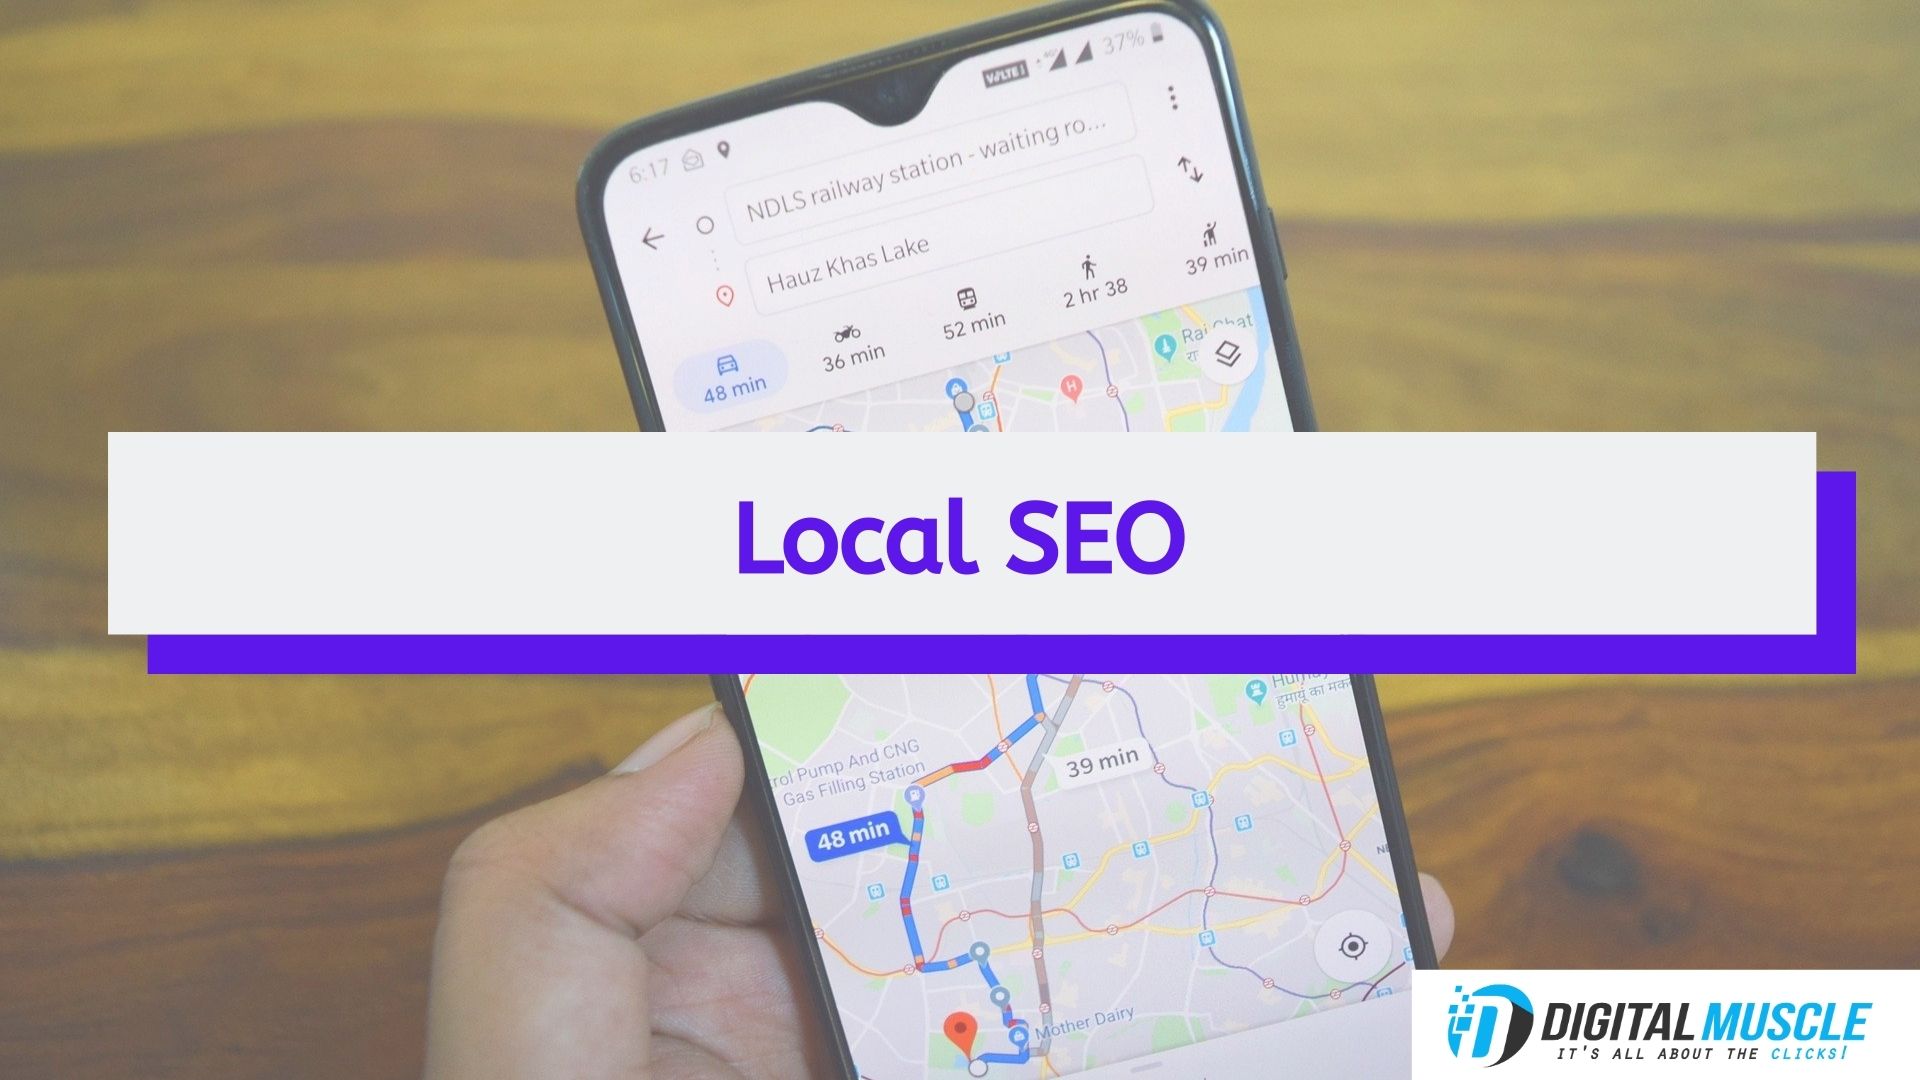 Local SEO for eCommerce strategy - eCommerce SEO best practices